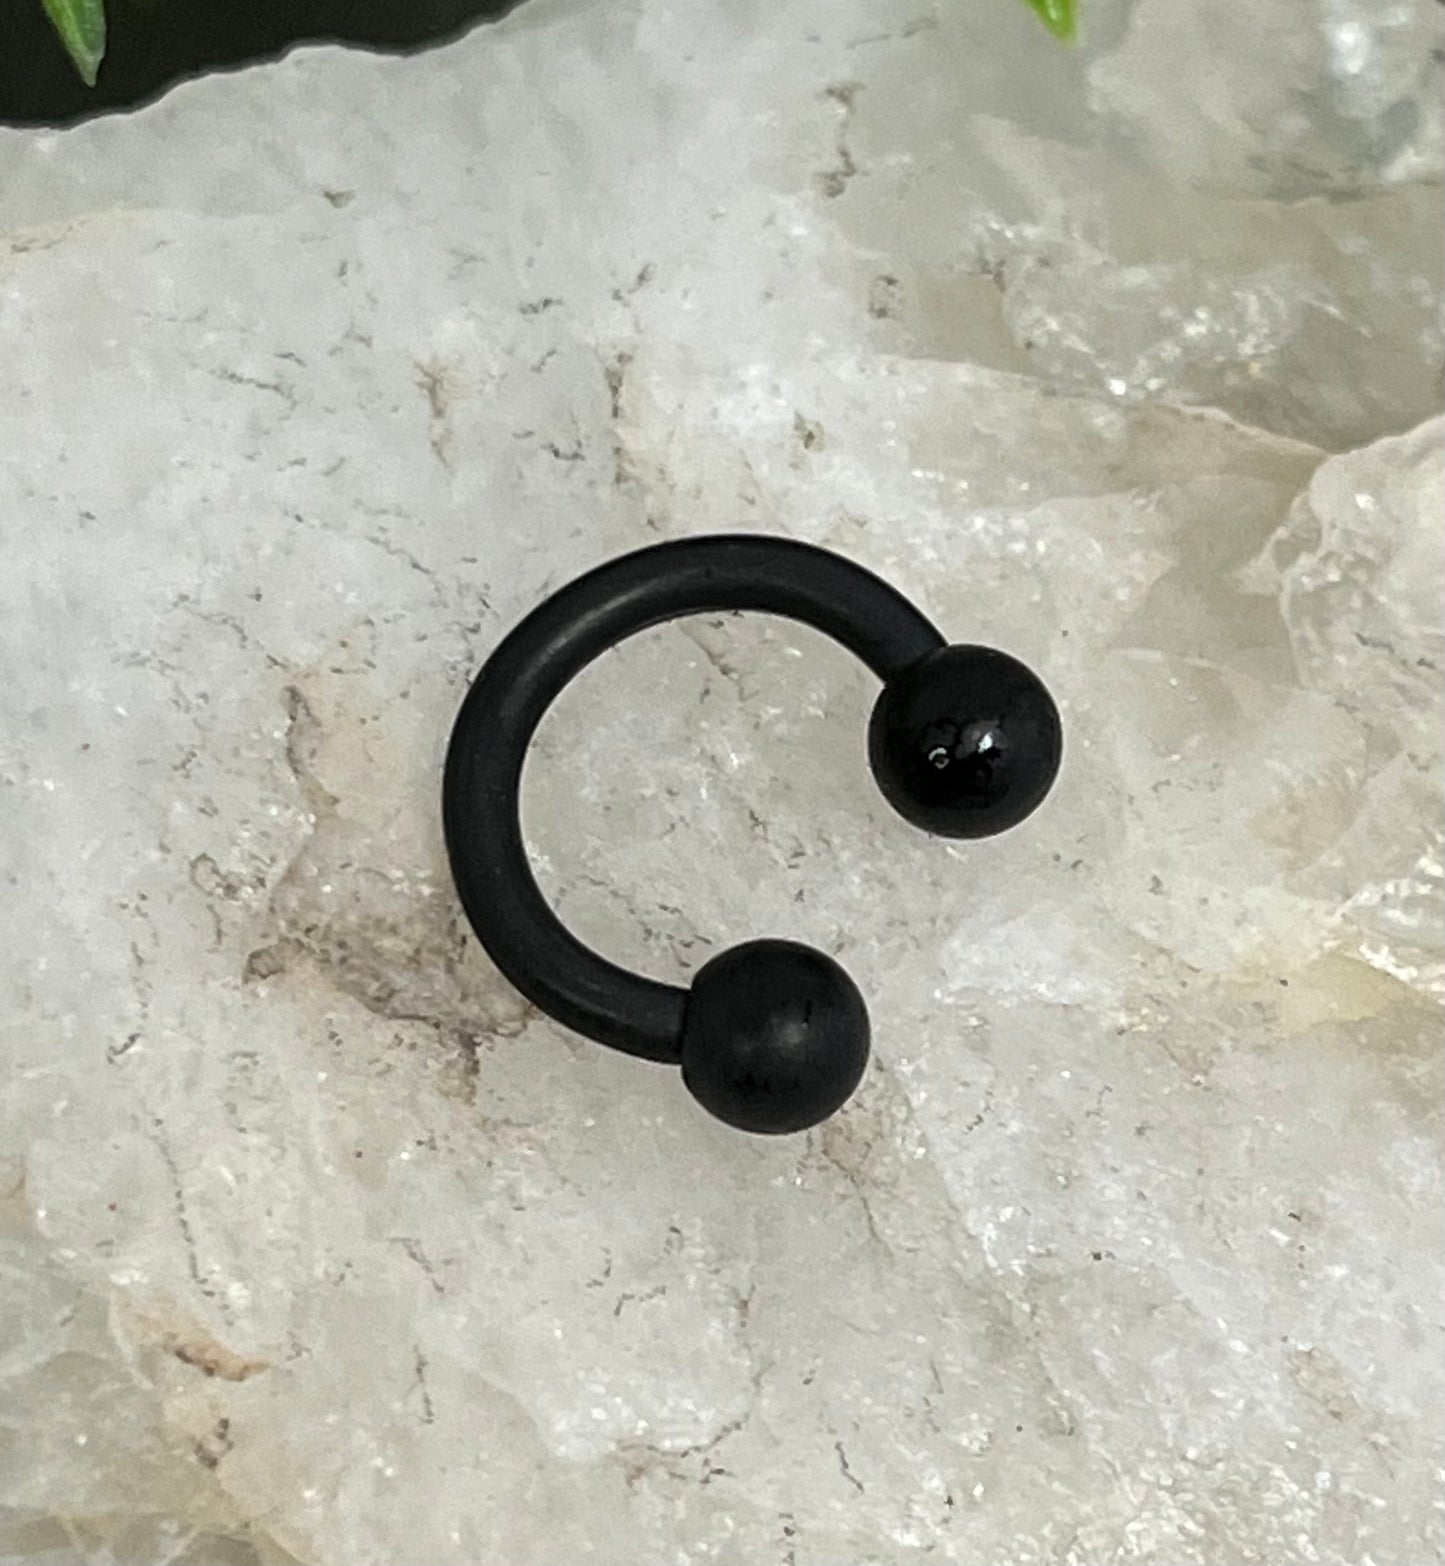 1 Piece Unique Matte Black IP Circular Barbell Horseshoe Ring - 16g, 14g- Internal Diameter 6mm, 8mm, 10mm - Ball Size 3mm or 4mm Available!